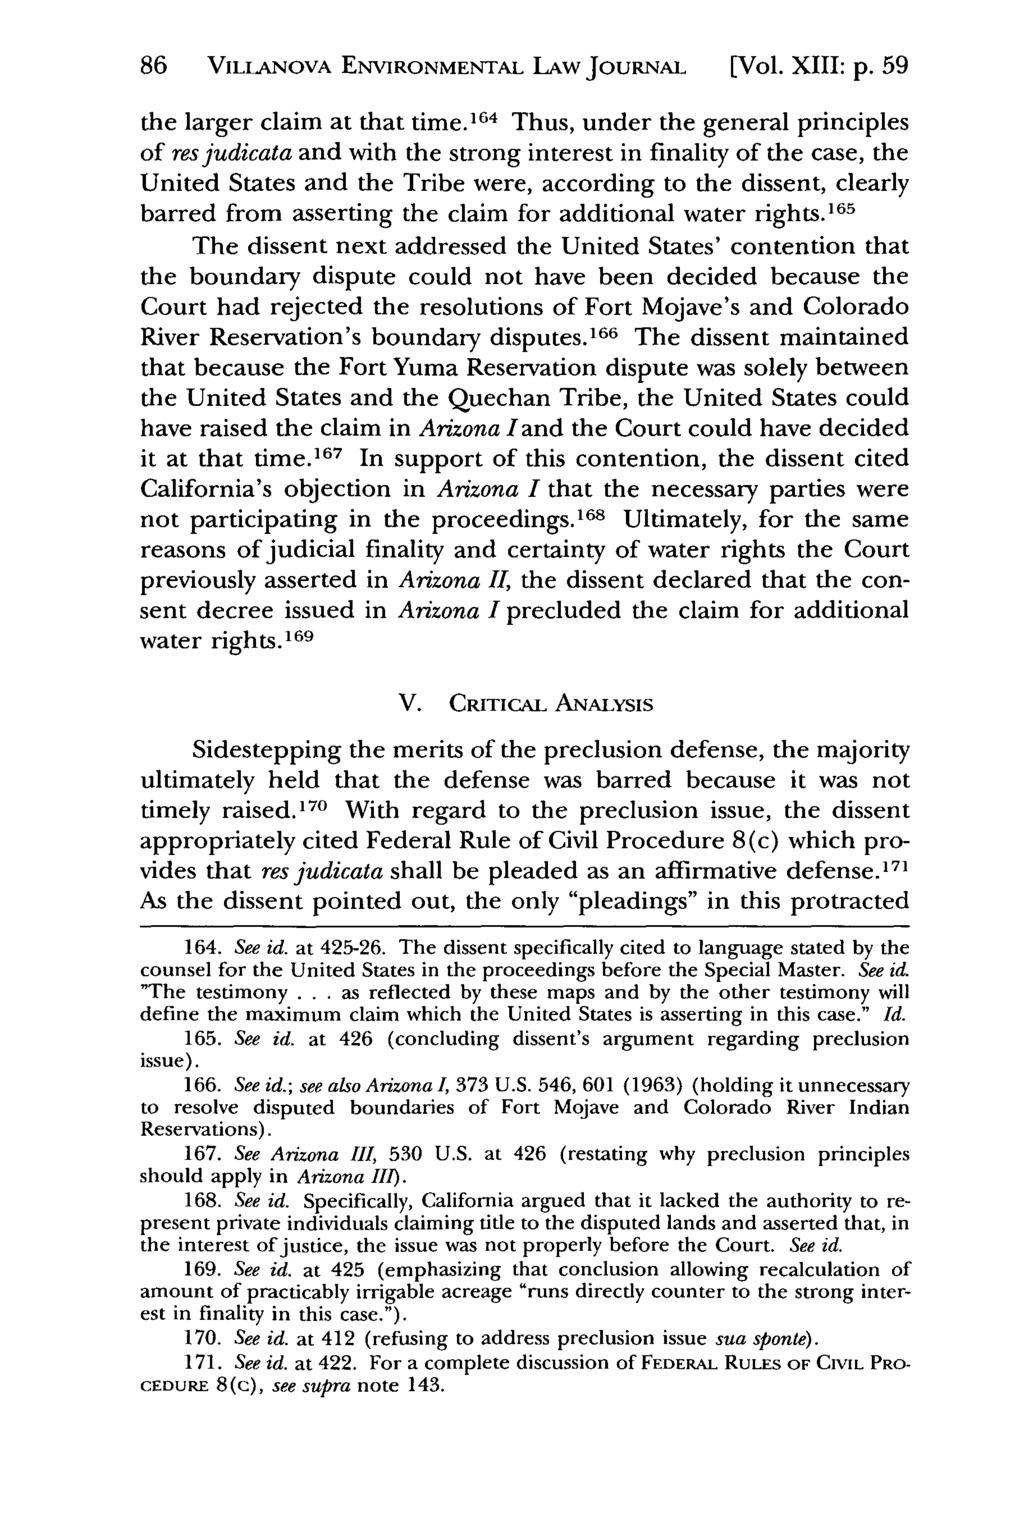 86 VILLANOVA Villanova Environmental ENVIRONMENTAL Law Journal, LAw Vol. 13, JouNAL Iss. 1 [2002], Art. [Vol. 2 XIII: p. 59 the larger claim at that time.